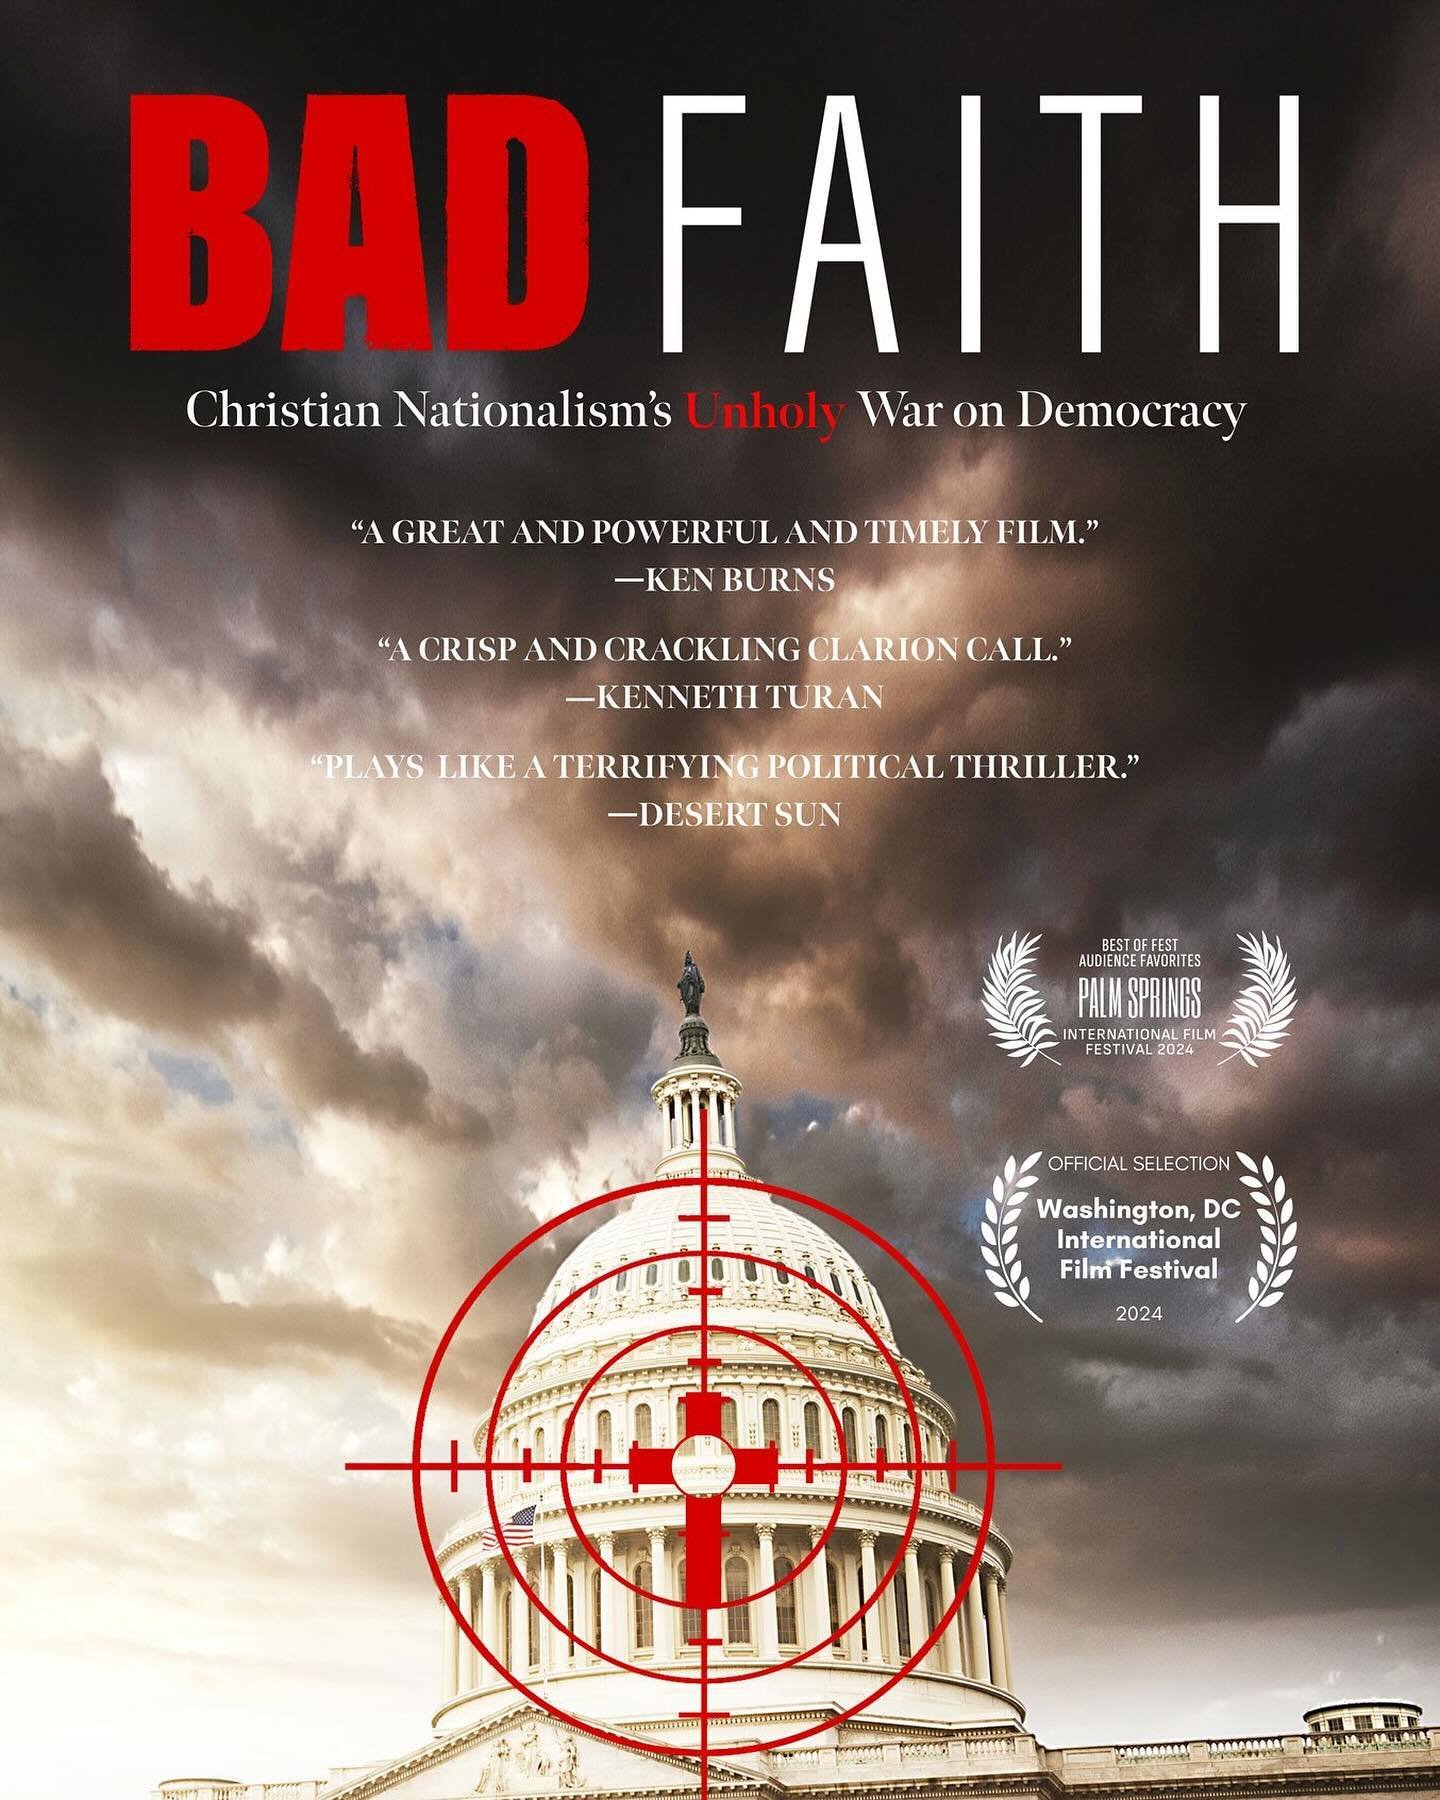 BAD FAITH TICKETS AVAILABLE NOW!!

We recommend you get your tickets early, as the last two films were sold out quickly, and people were clamoring for tickets after they had sold out. Tickets sliding scale $10-$25 to support the use of Sebastiani The